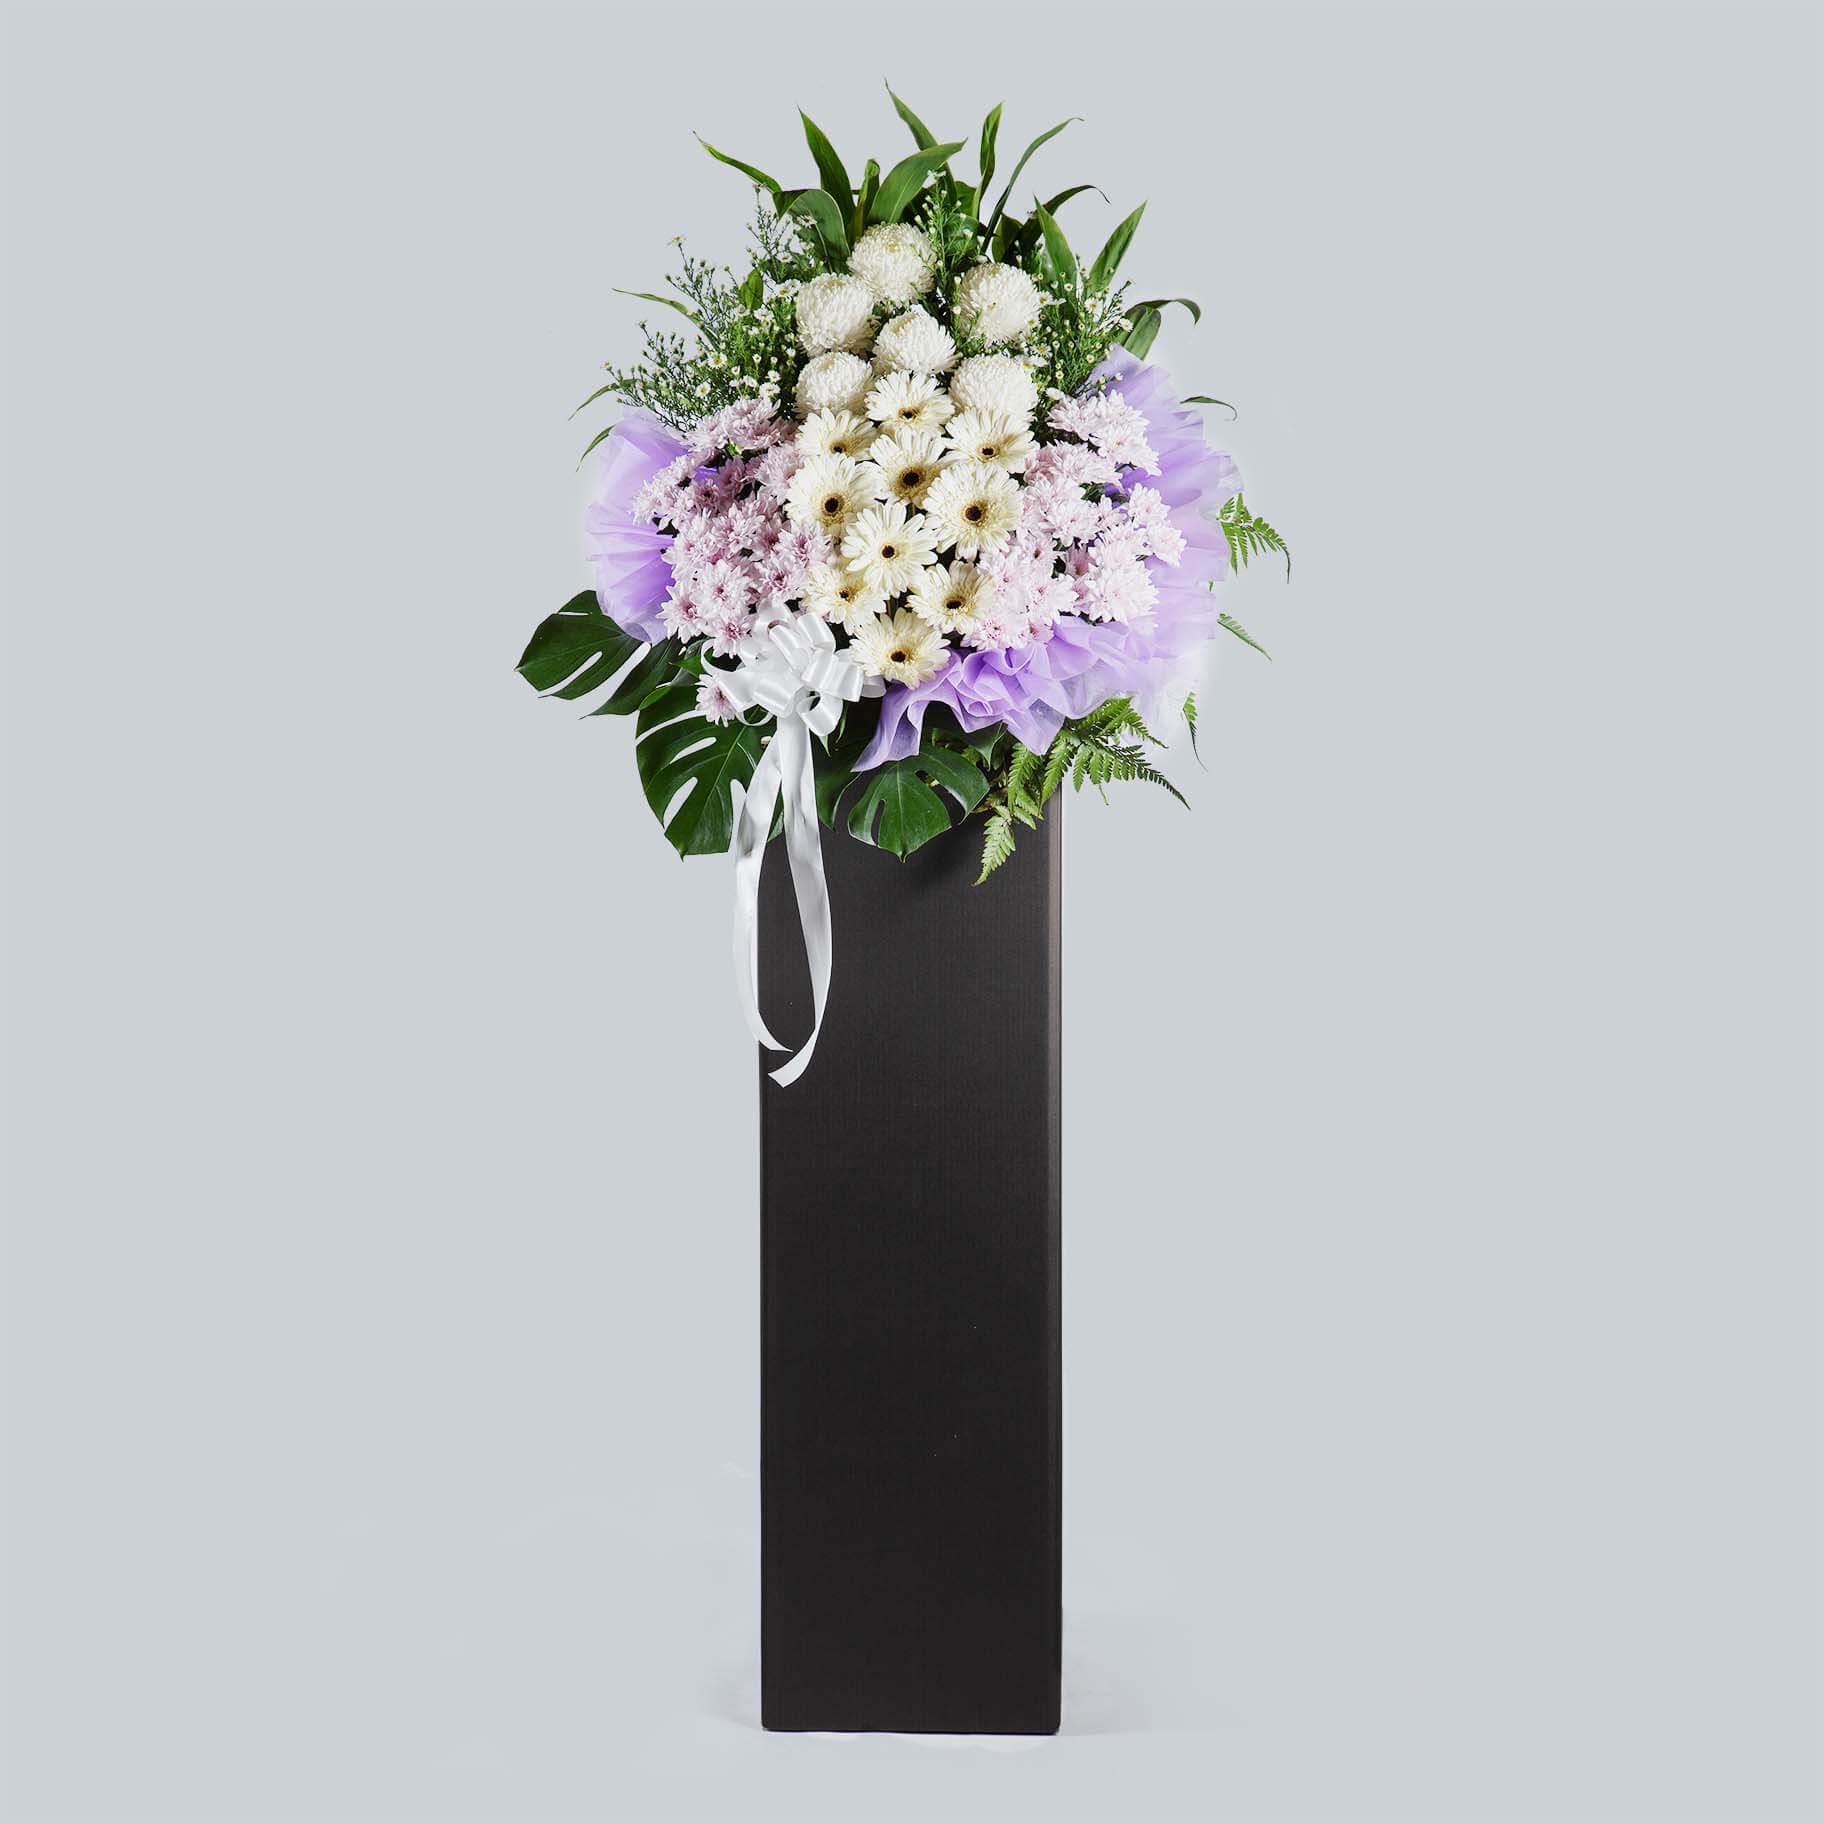 Beyond Flowers: Picking the Perfect Funeral Wreath to Speak Volumes